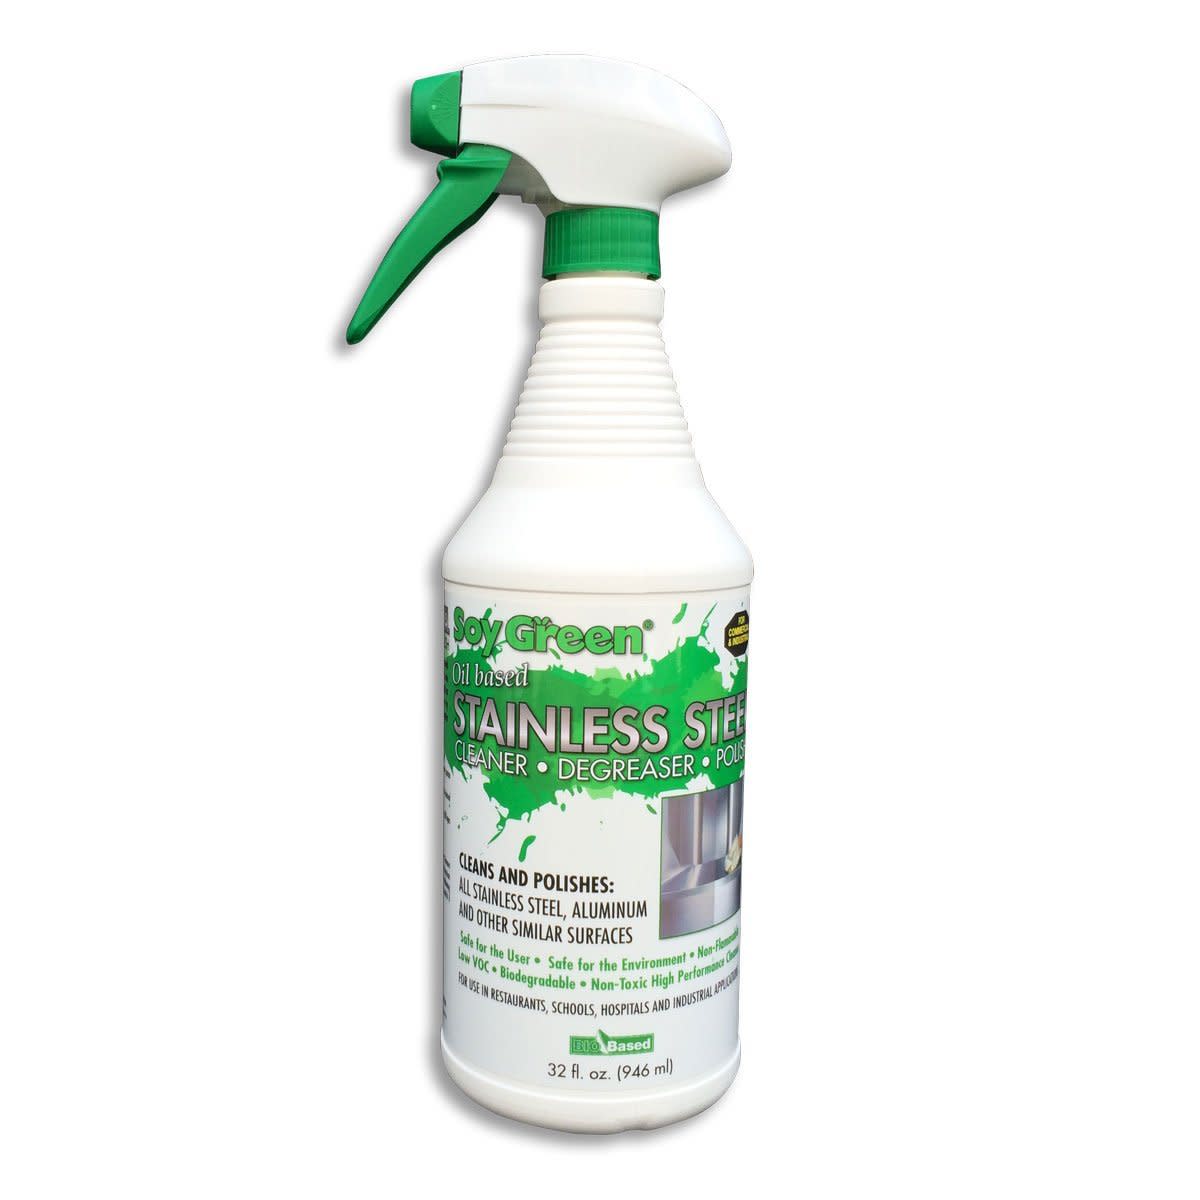 New packaging. Look for the round white spray bottle. Of course, it is still SoyGreen. 